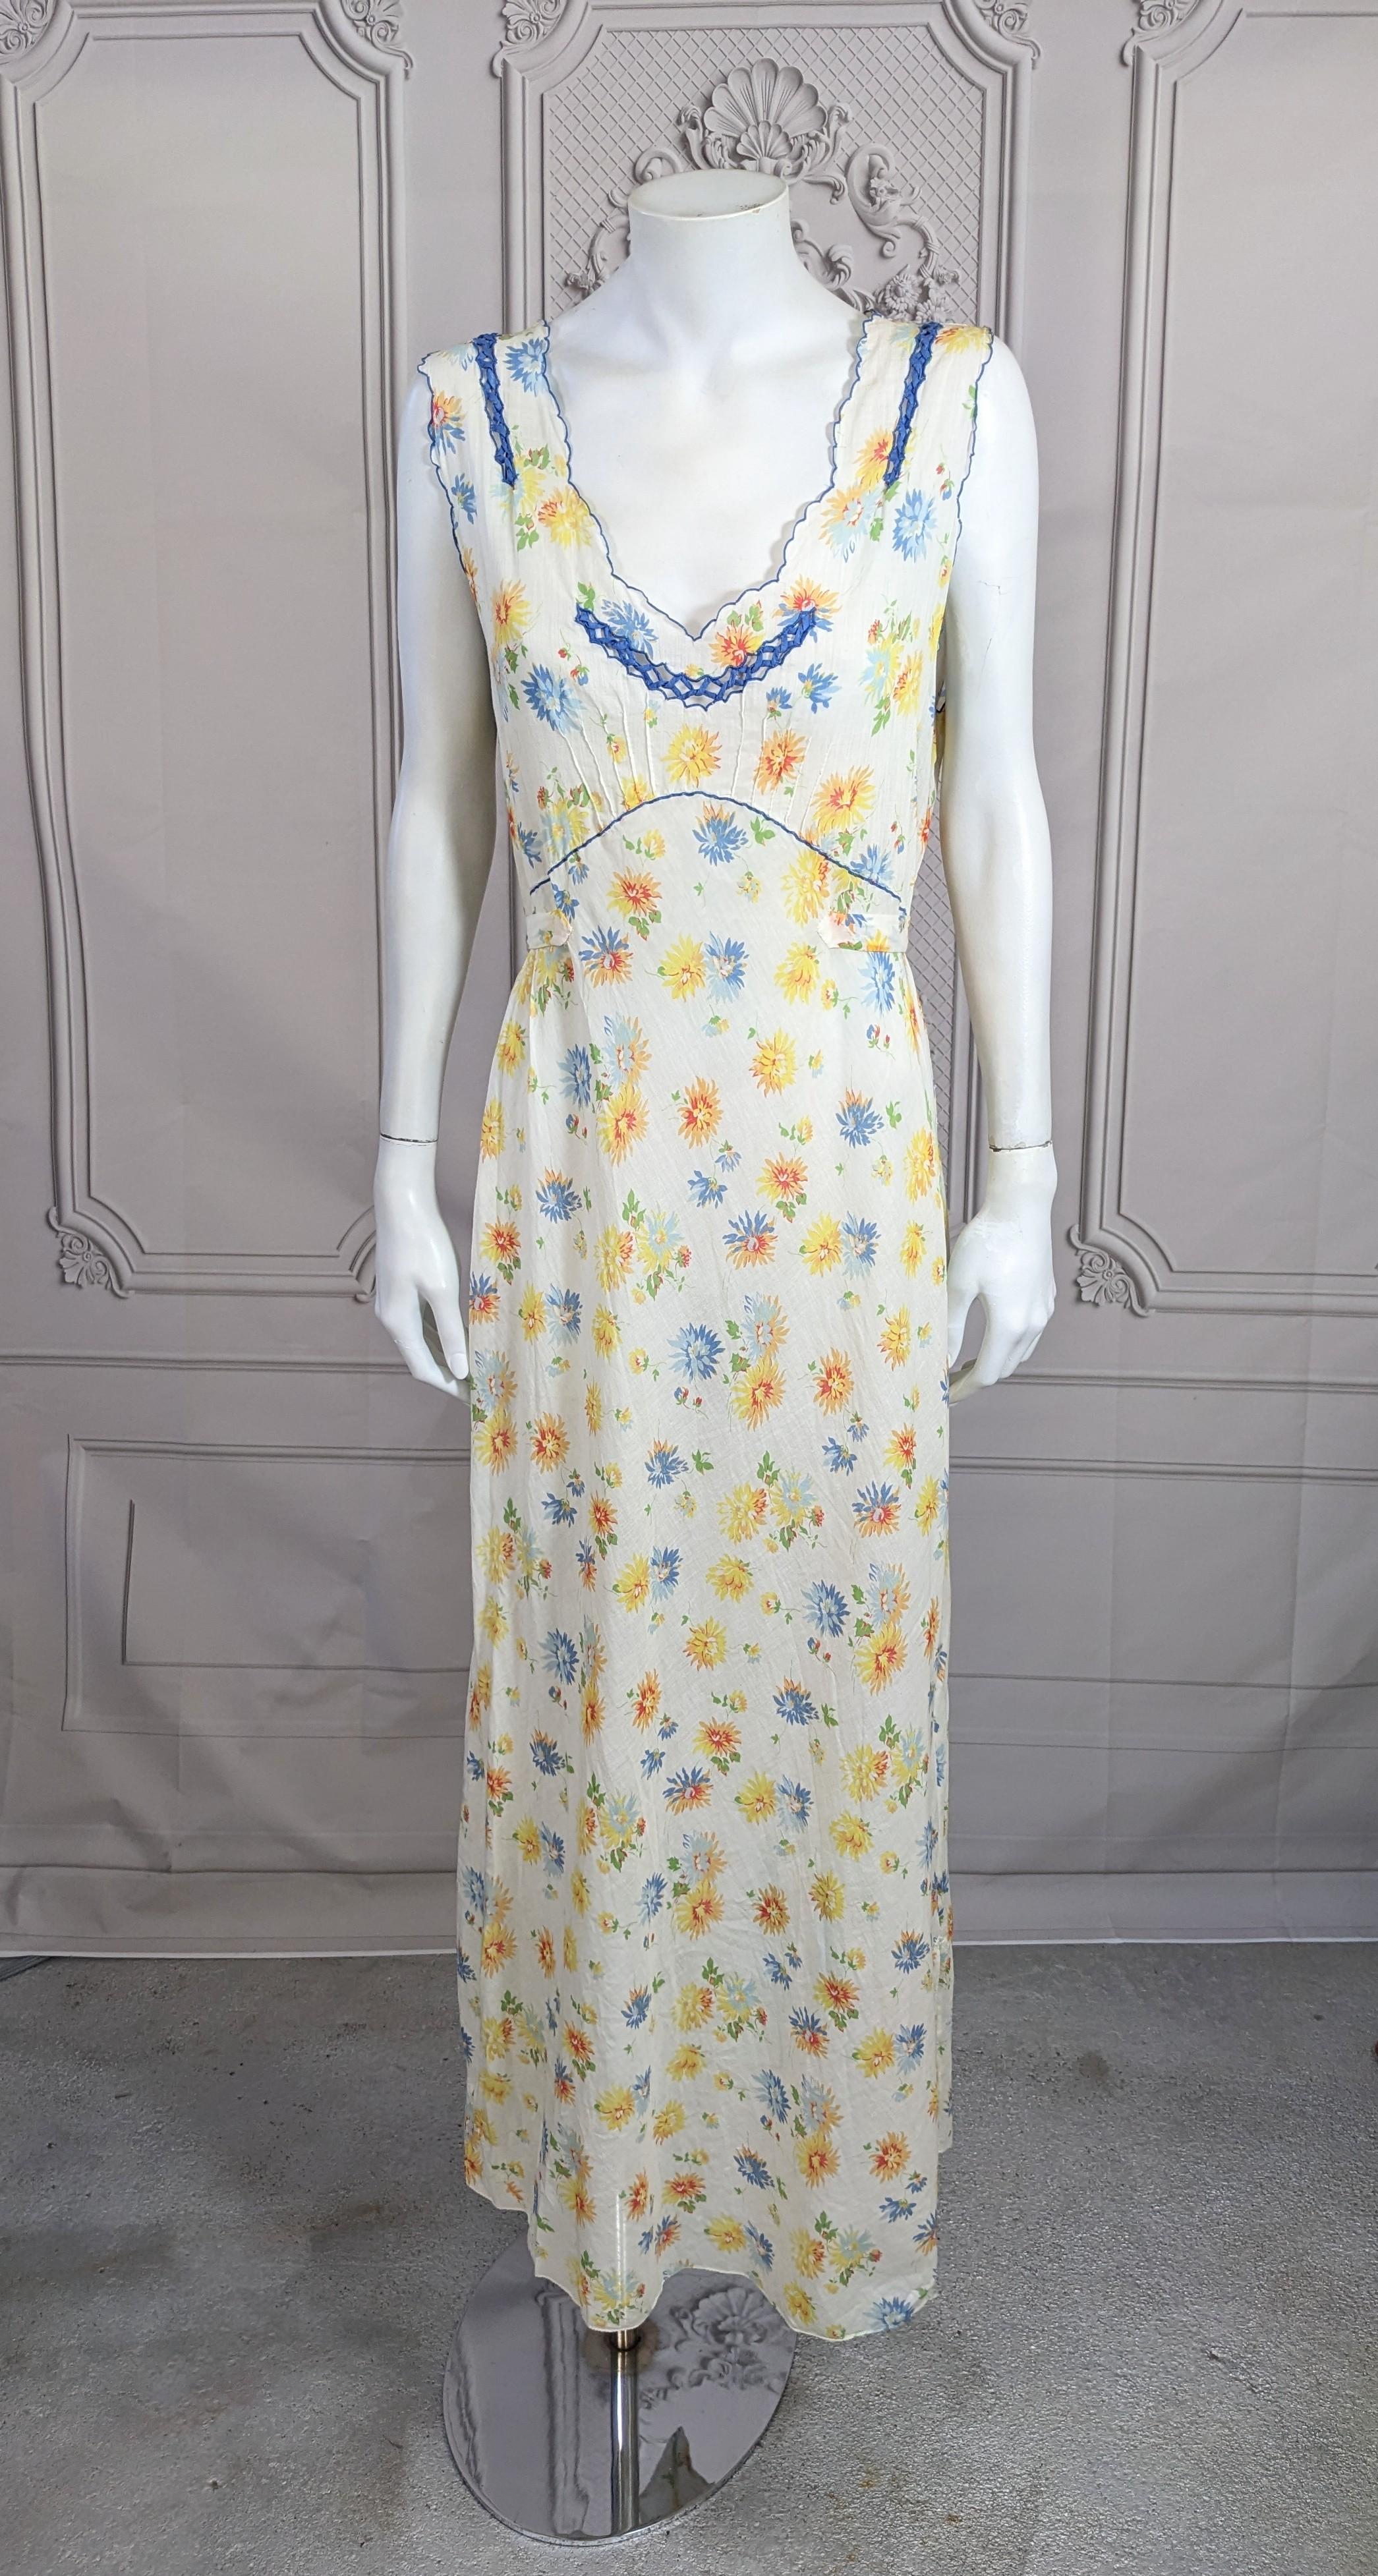 Charming Art Deco Floral Batiste Gown from the 1930's. Soft cotton floral batiste is bias cut with scalloped blue edges, pin tucks and panels of hand made open work blue bias cording. 2 ties at front allow for pulling in the waist area. 1930's USA.